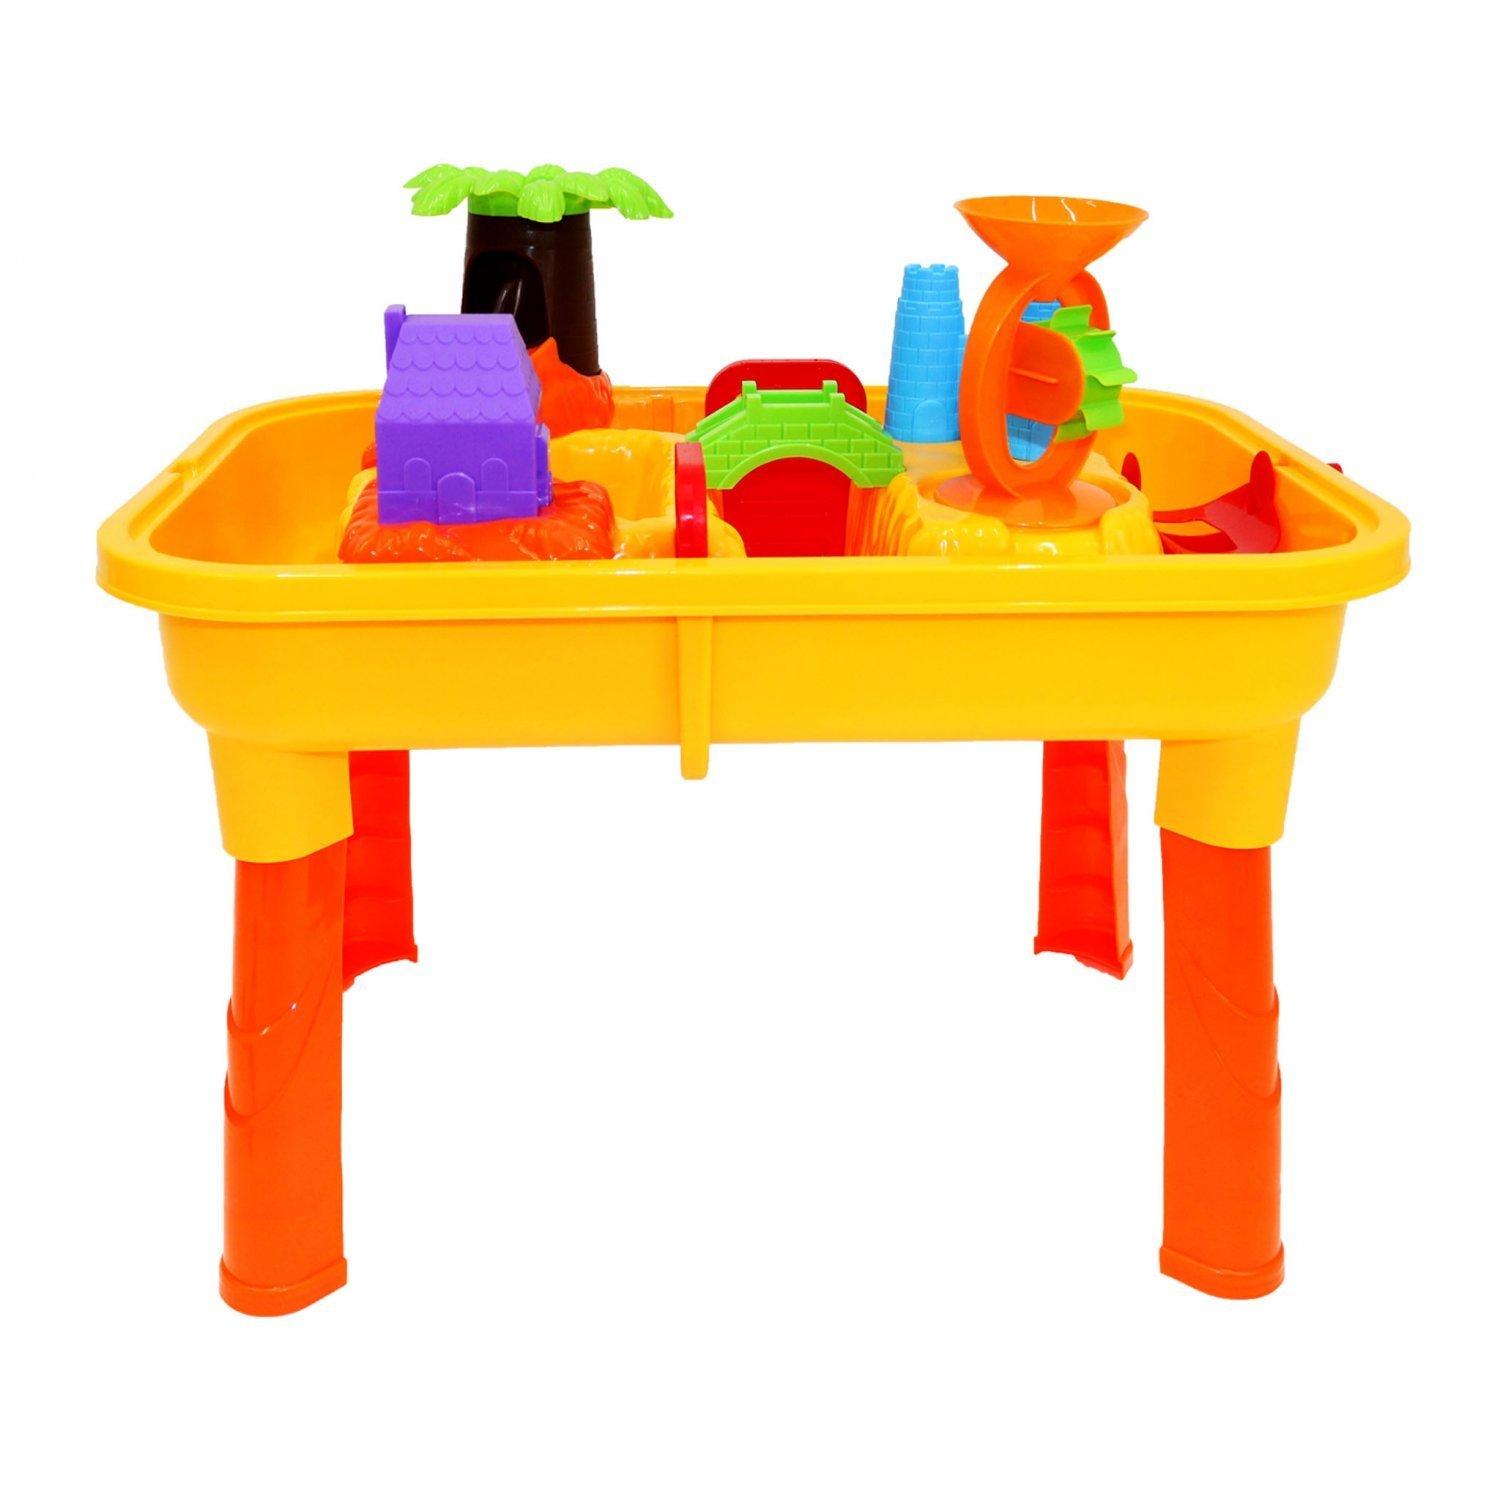 Childrens Sand Water Table With Accessories